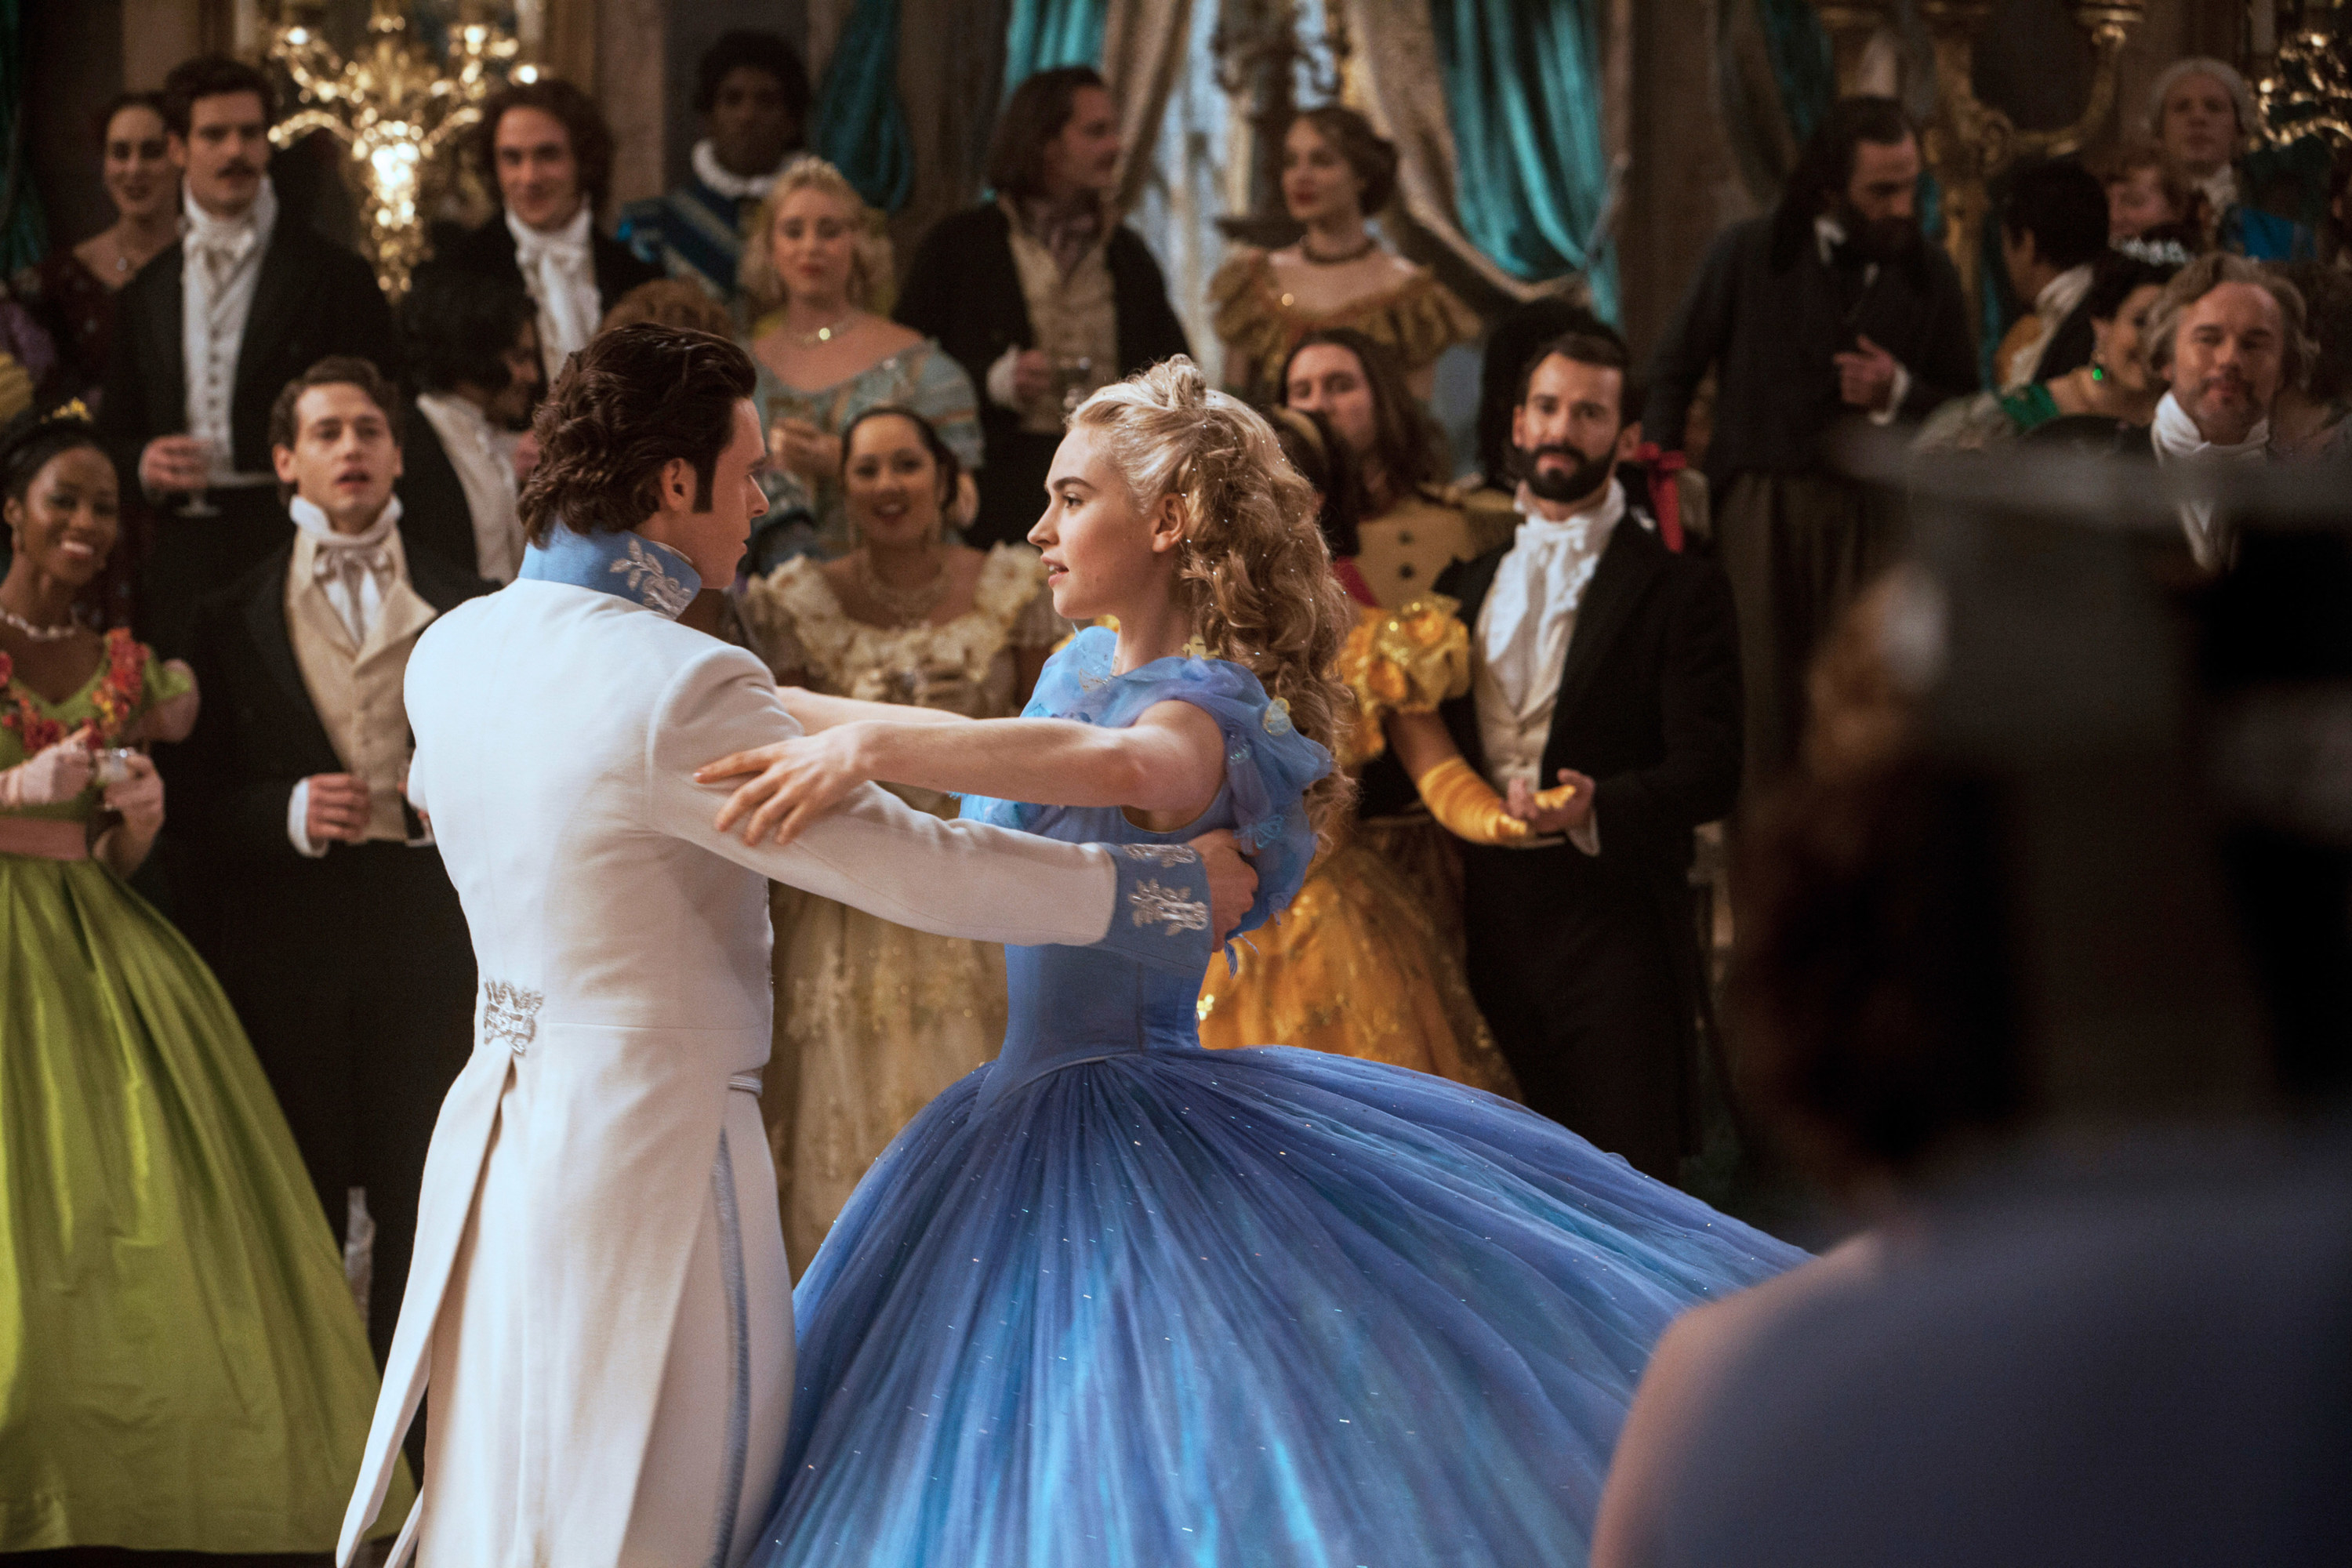 The Prince and Cinderella dancing in the live-action version